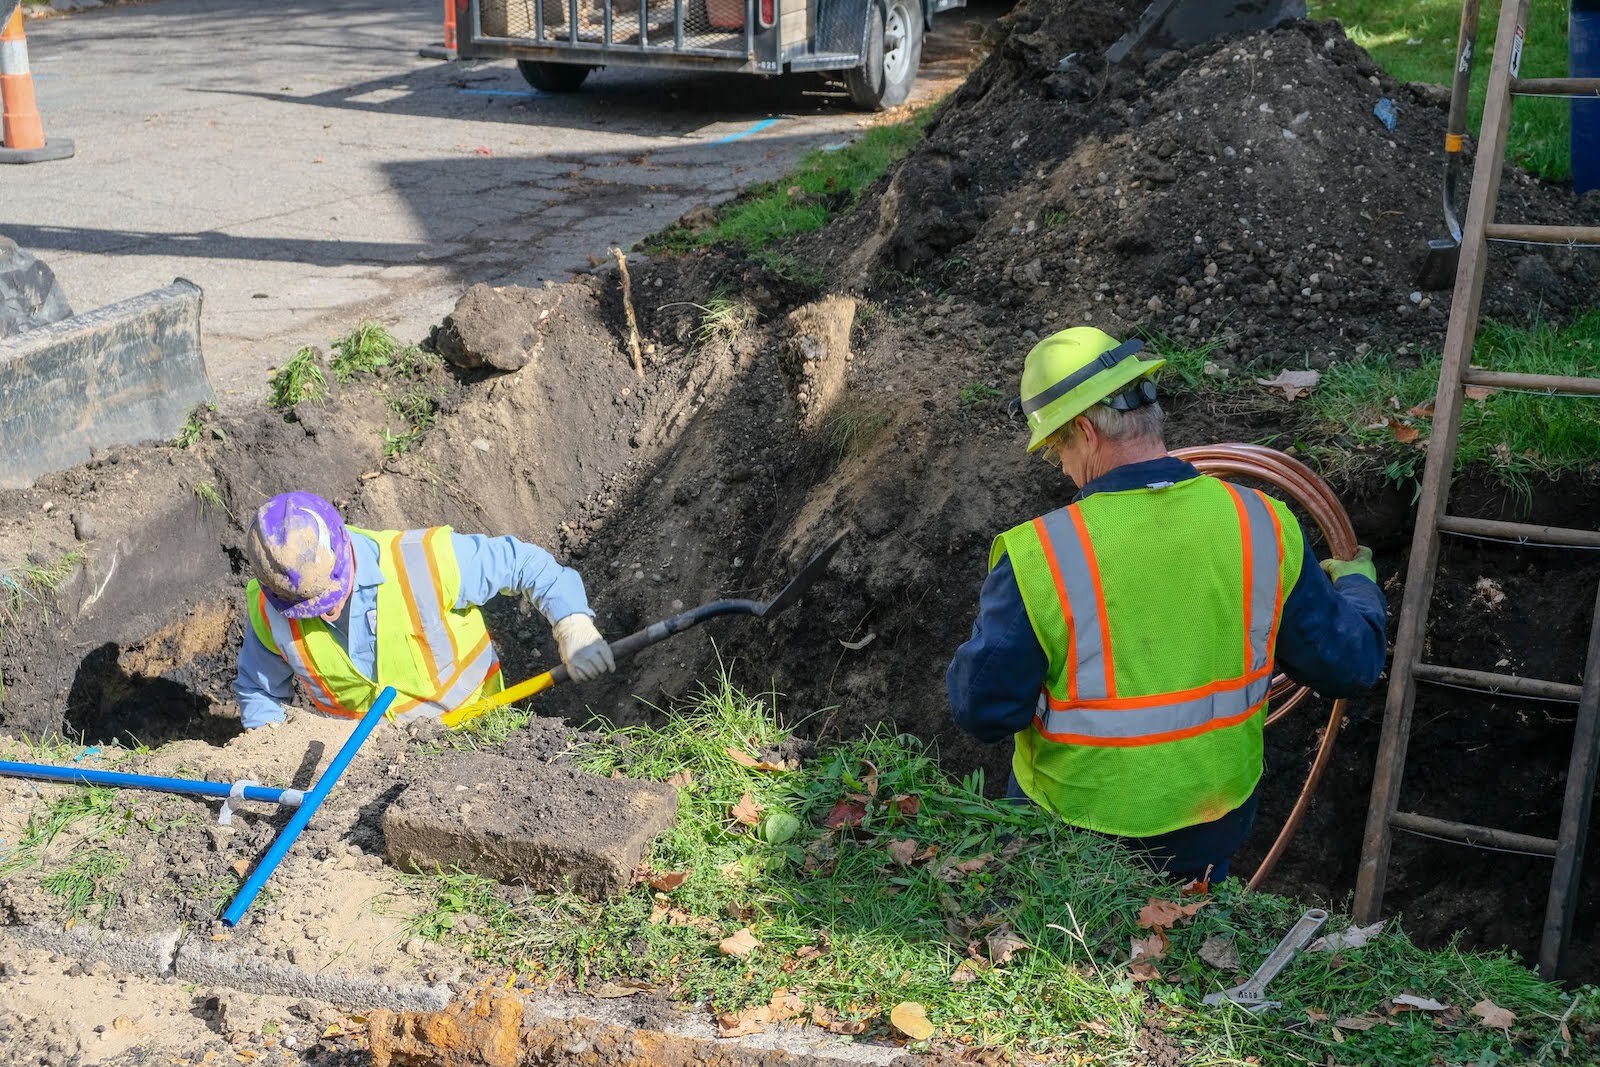 2,000 down, 8,000 to go the City of Kalamazoo says of replacing lead water service lines